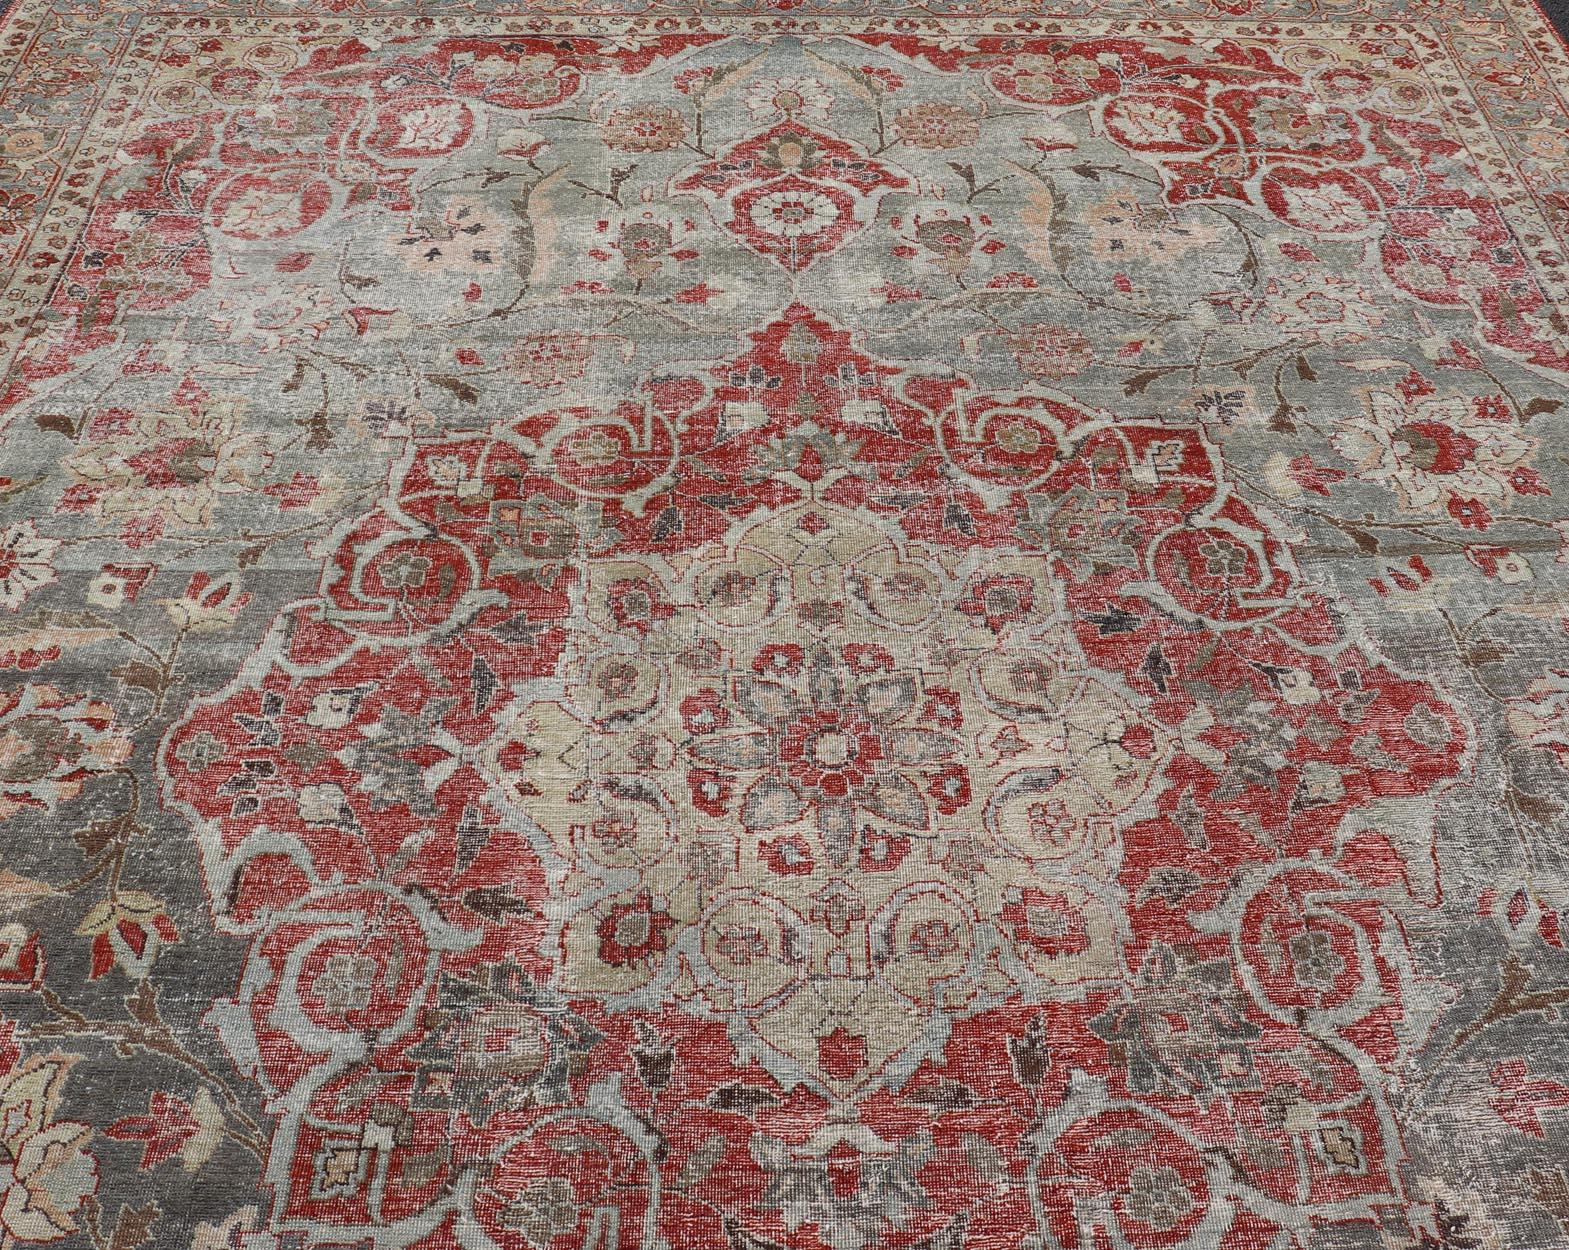 20th Century Antique Persian Tabriz Rug with Floral Medallion Design in Tan, Red, and Lt Blue For Sale